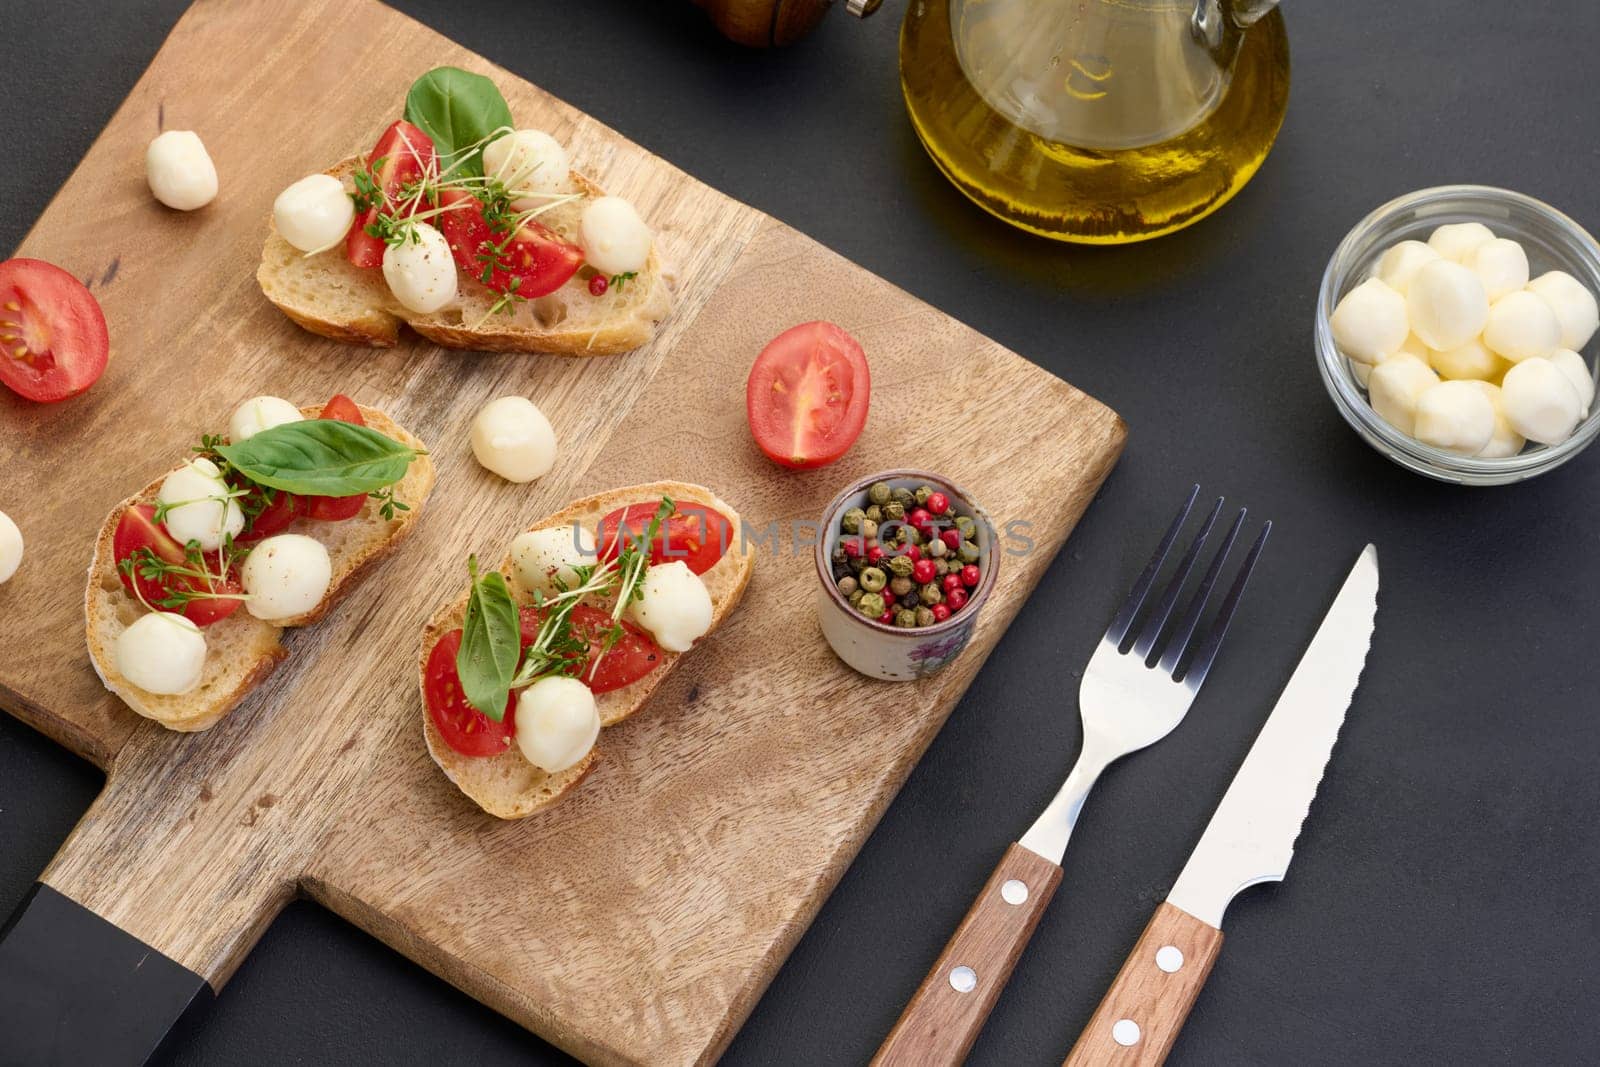 Round mozzarella, cherry tomatoes and microgreens on a piece of white bread, a healthy sandwich